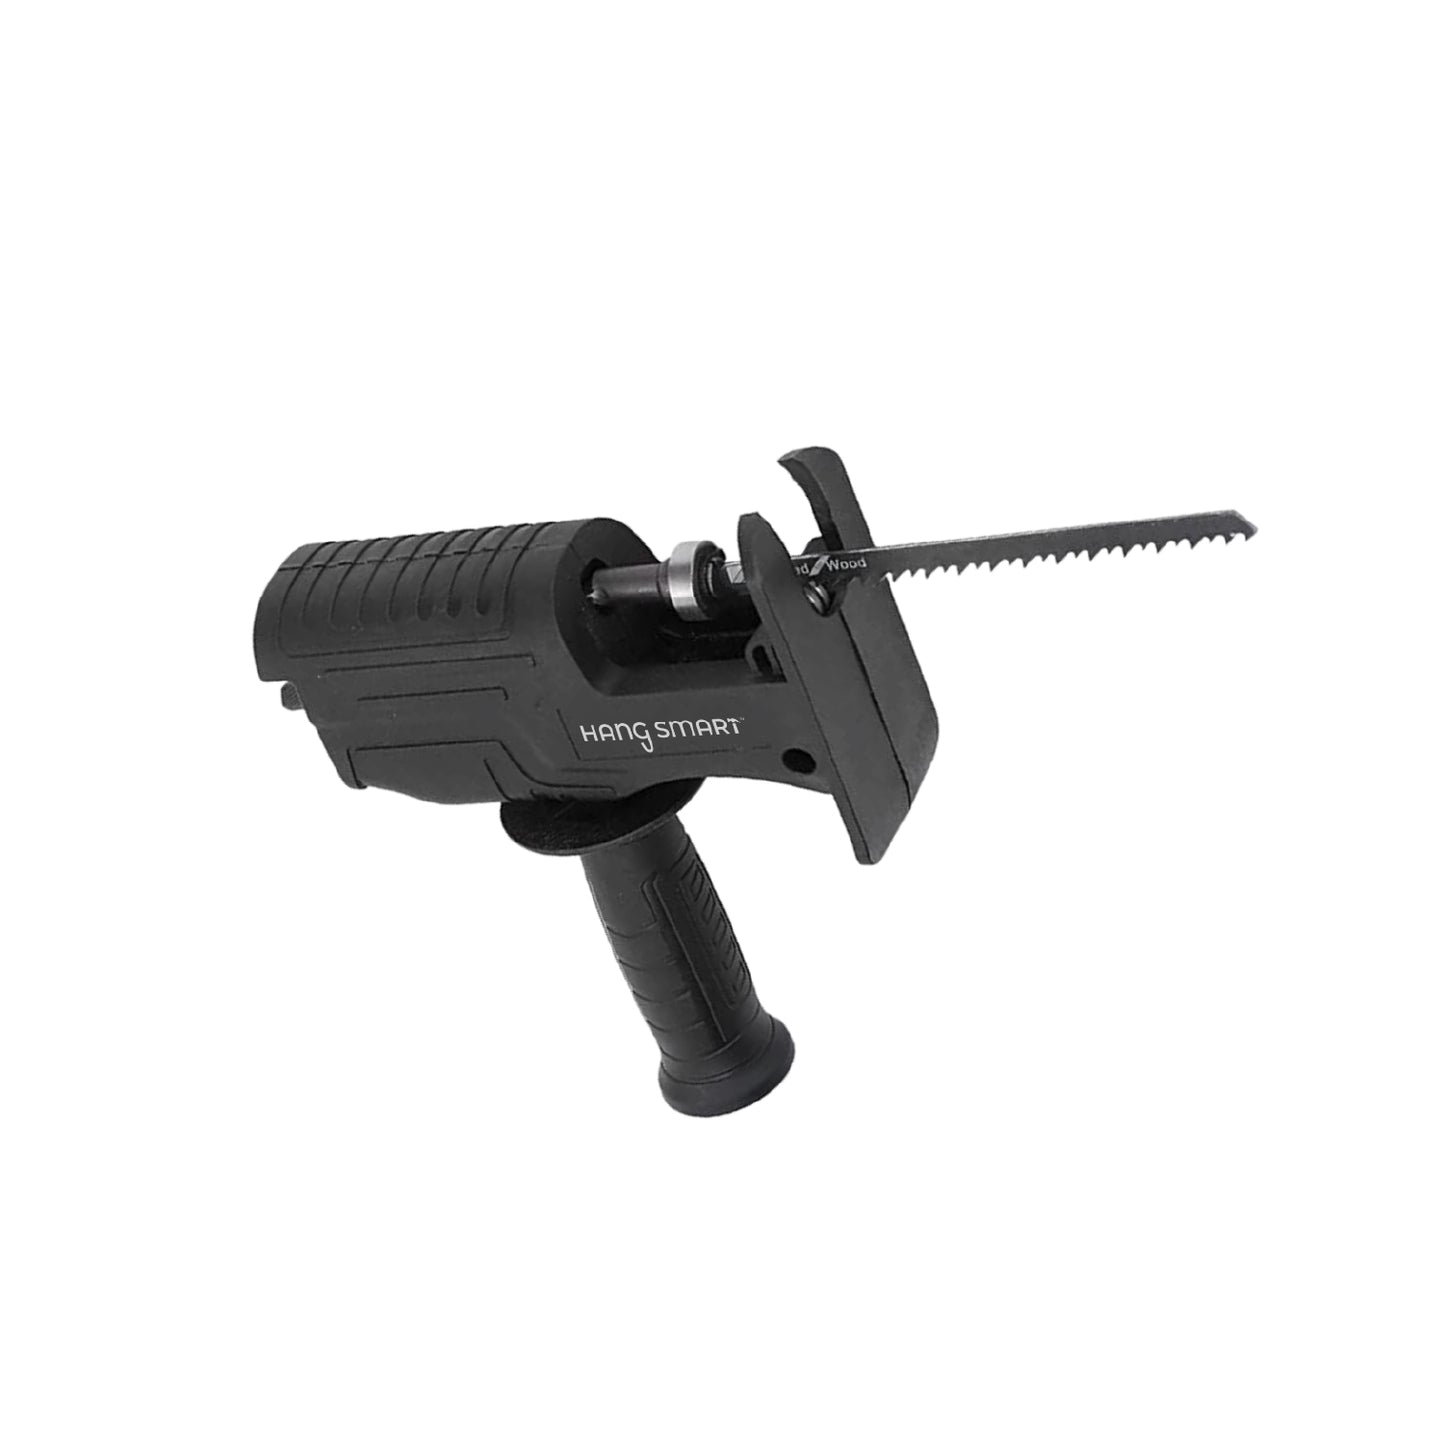 drywall saw cutter adapter product image